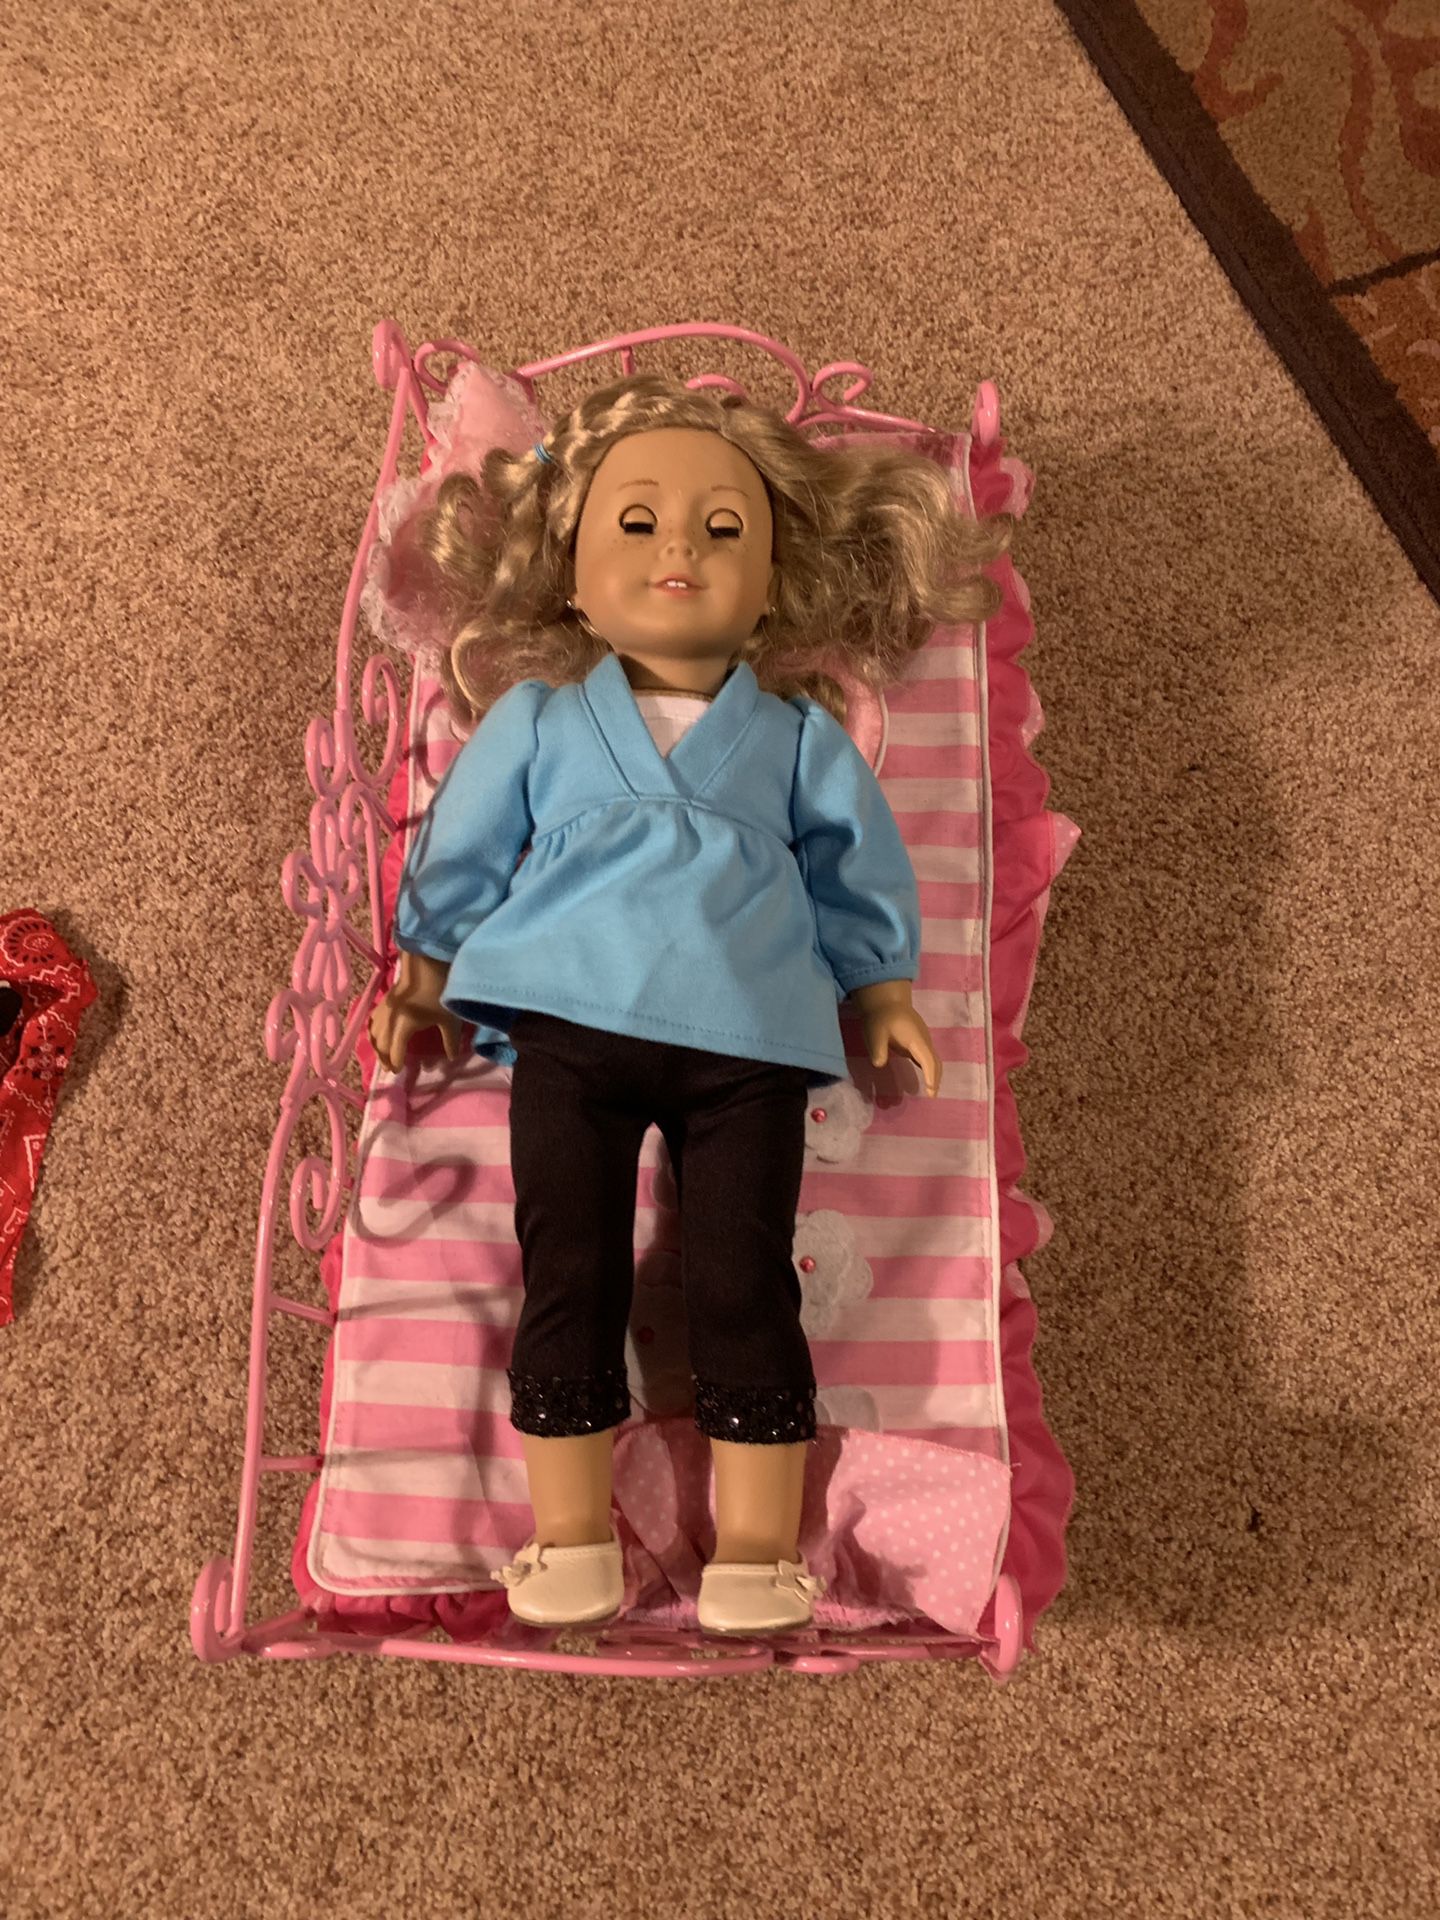 American Girl Doll, bed, dog, bag, outfits, and accessories